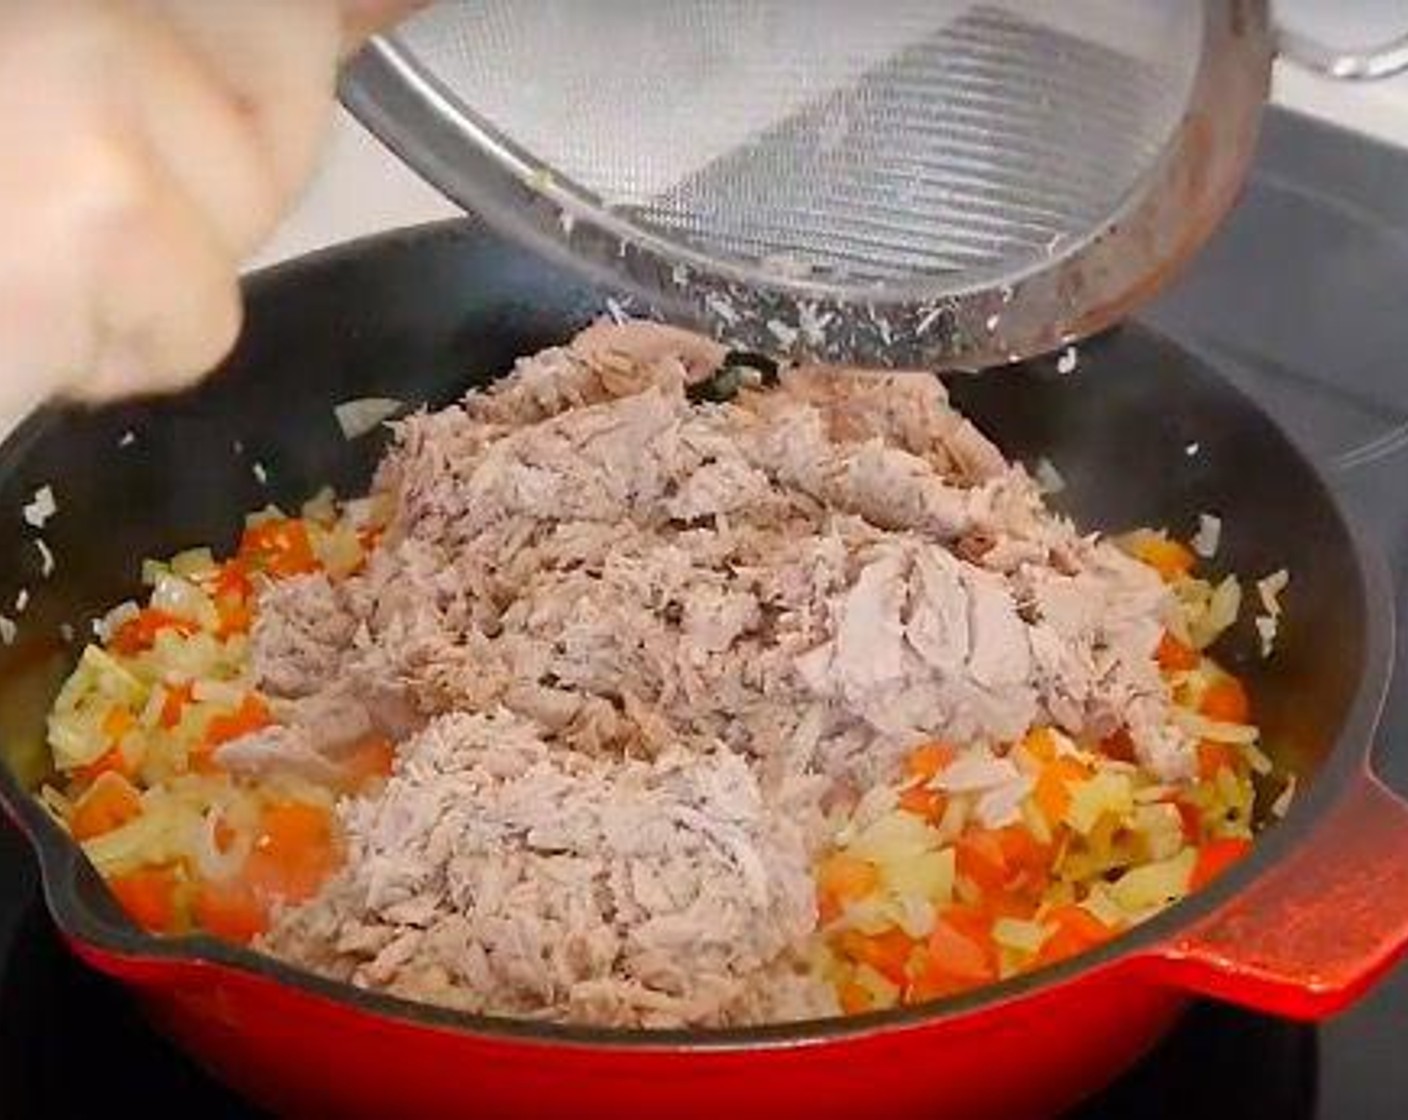 step 3 Then add the Canned Tuna (2 cups) which has been previously drained of any liquid or oil, and mix well. Season with Salt (to taste) and Ground Black Pepper (to taste) to taste and leave to cook for another 5 minutes. Then set aside to cool down.